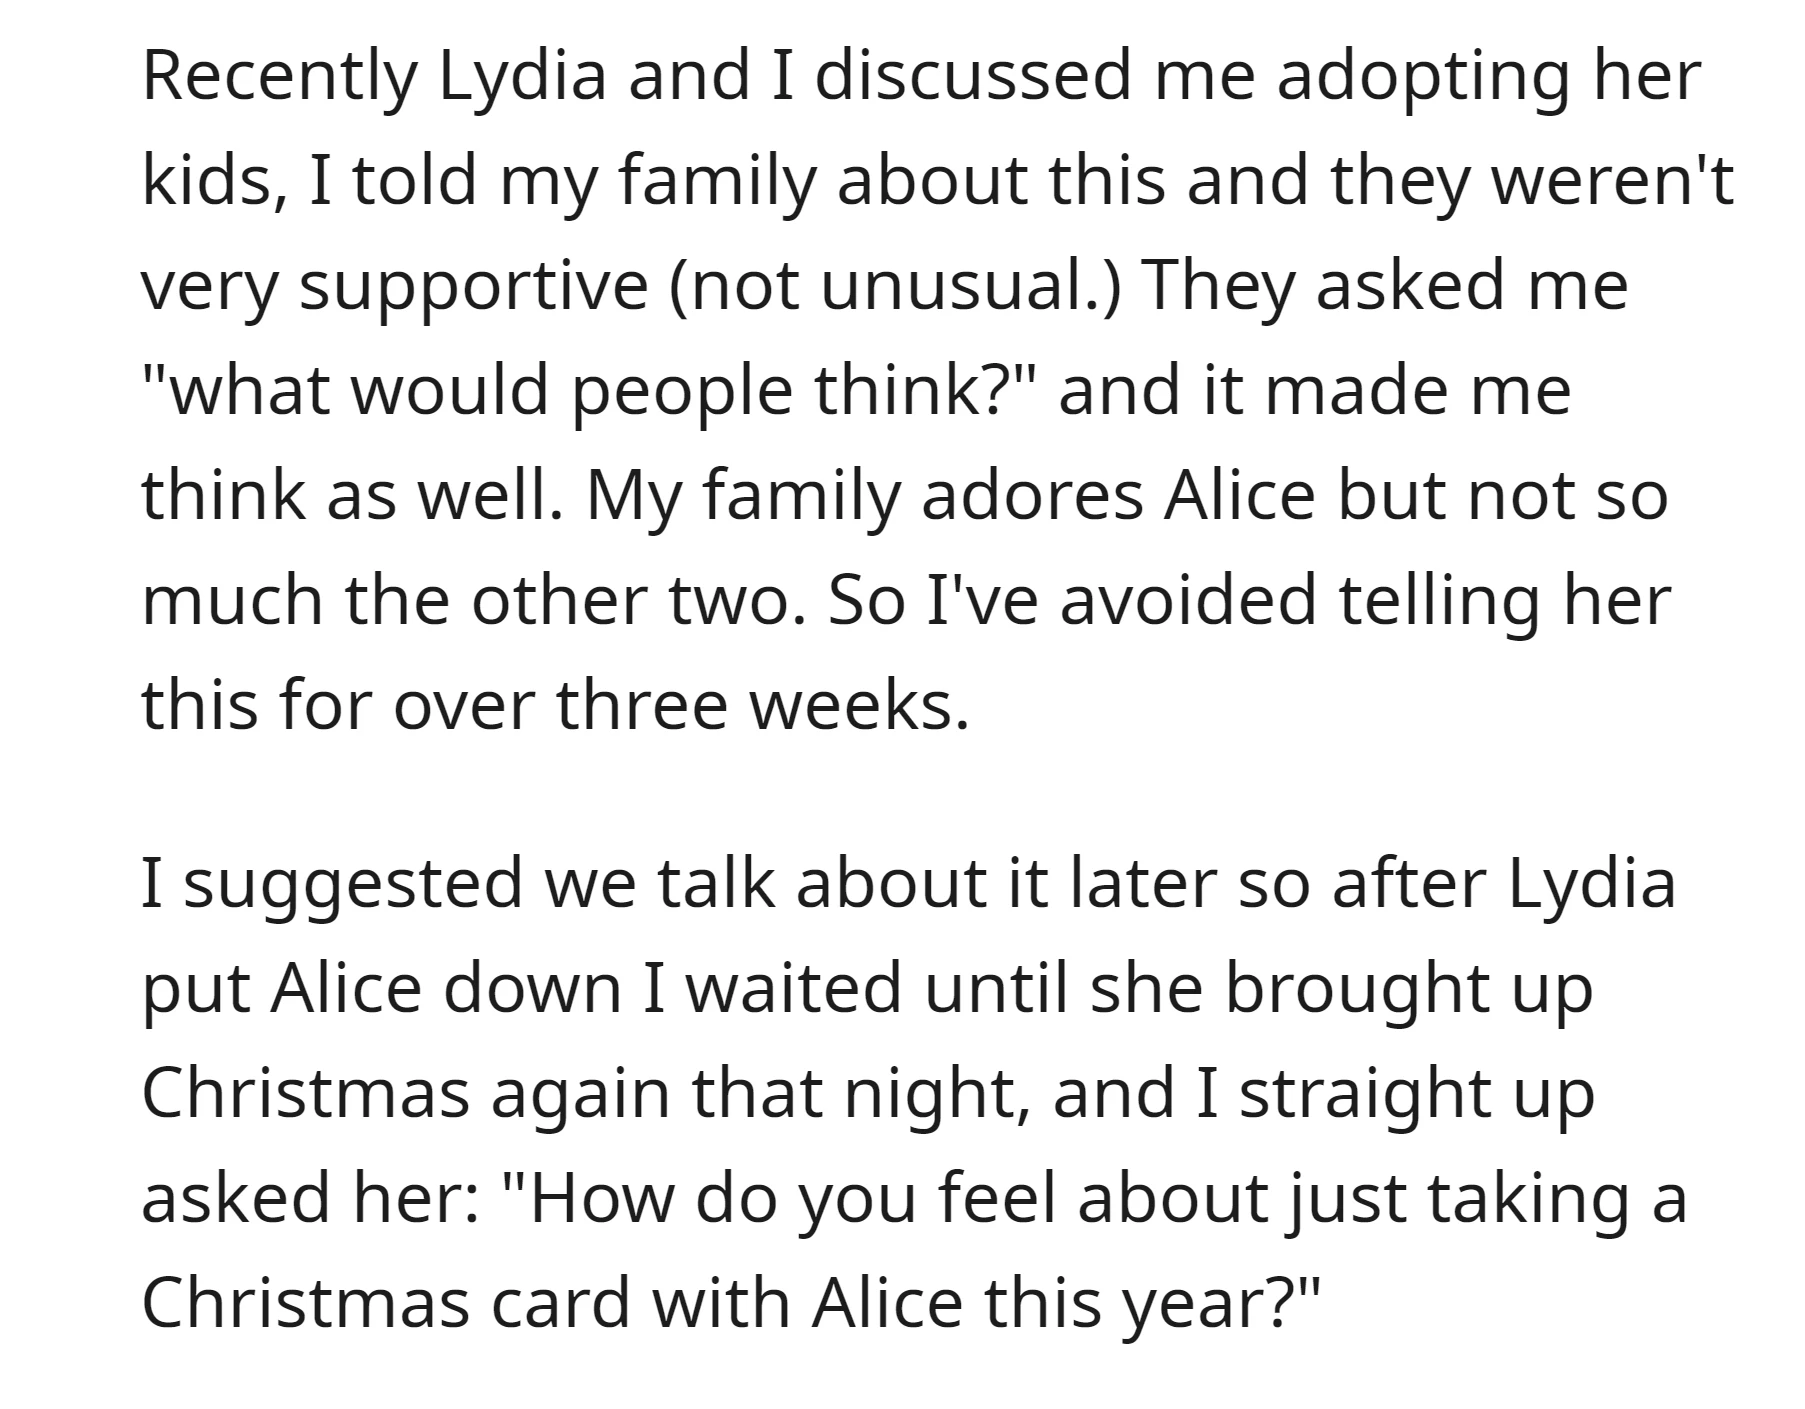 OP asked his wife about the possibility of taking a Christmas card with just their daughter